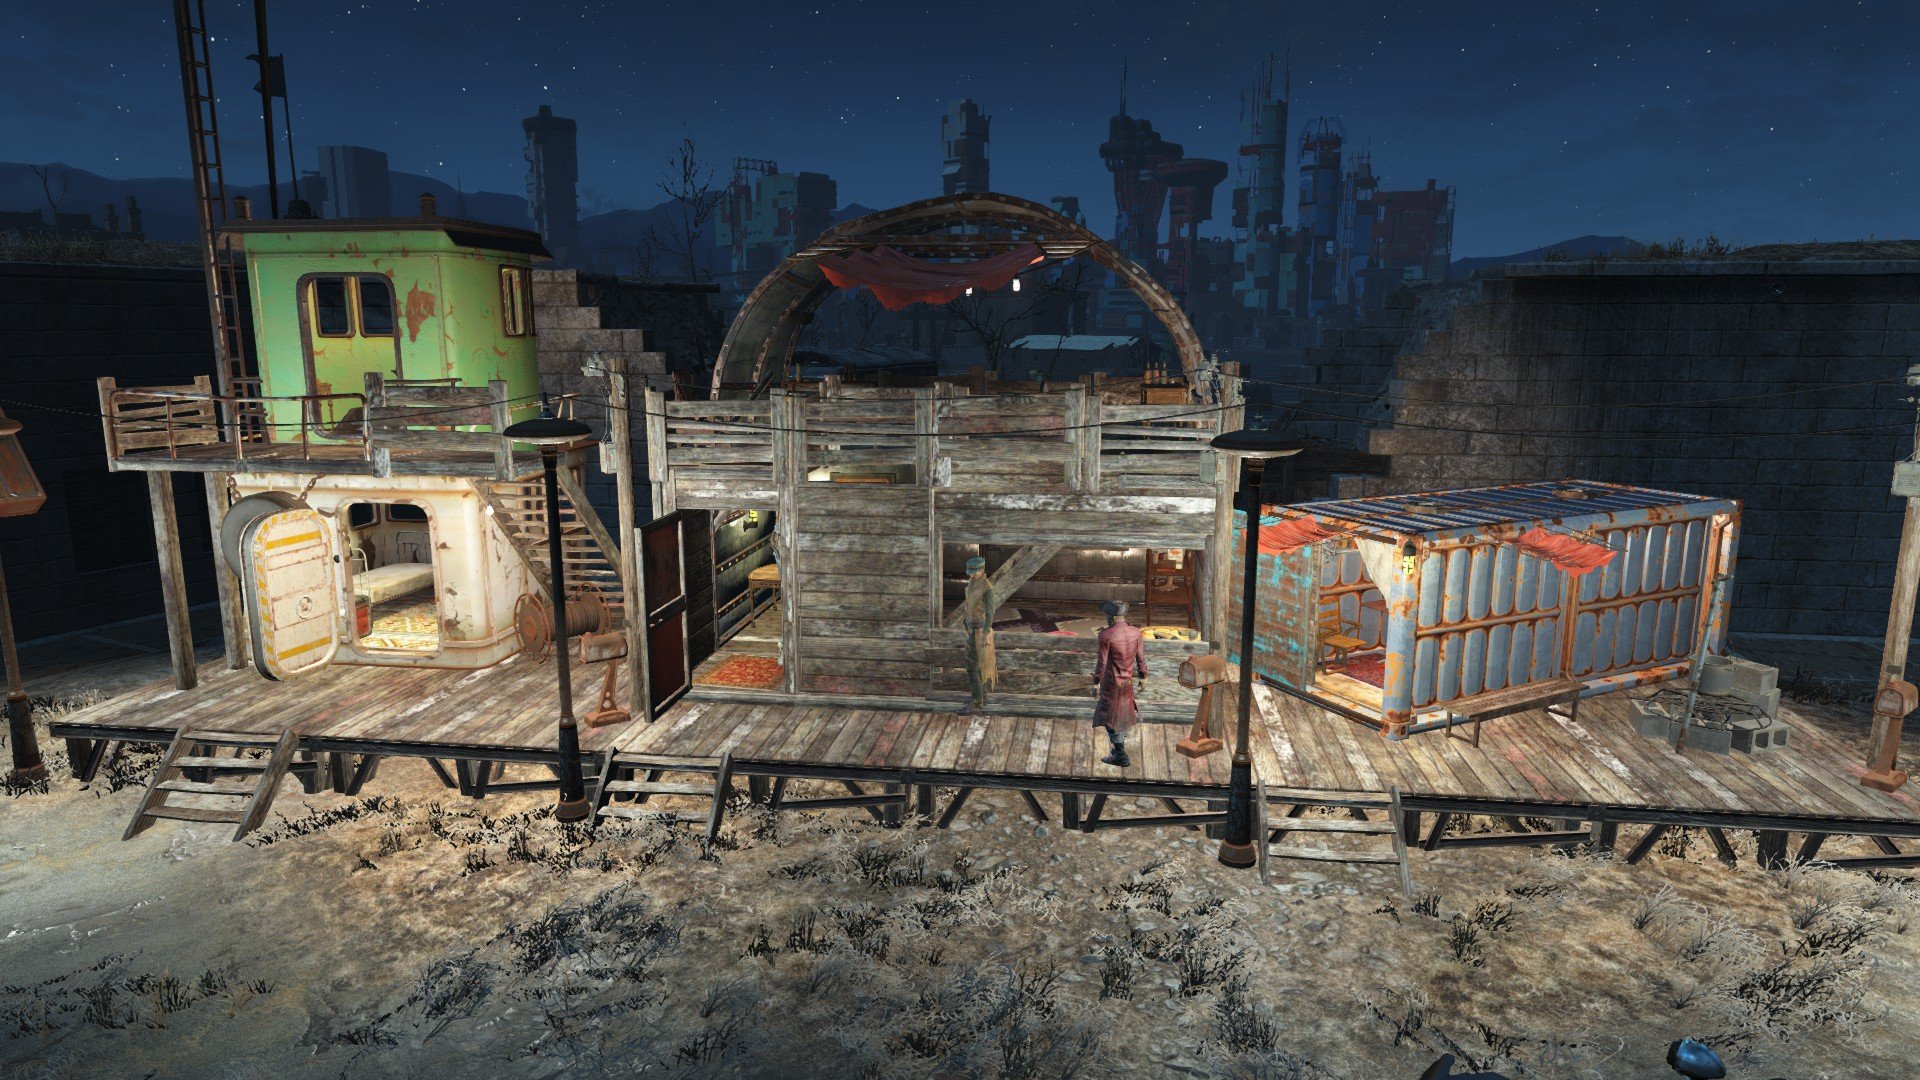 Conquest build new settlements and camping fallout 4 на русском фото 22